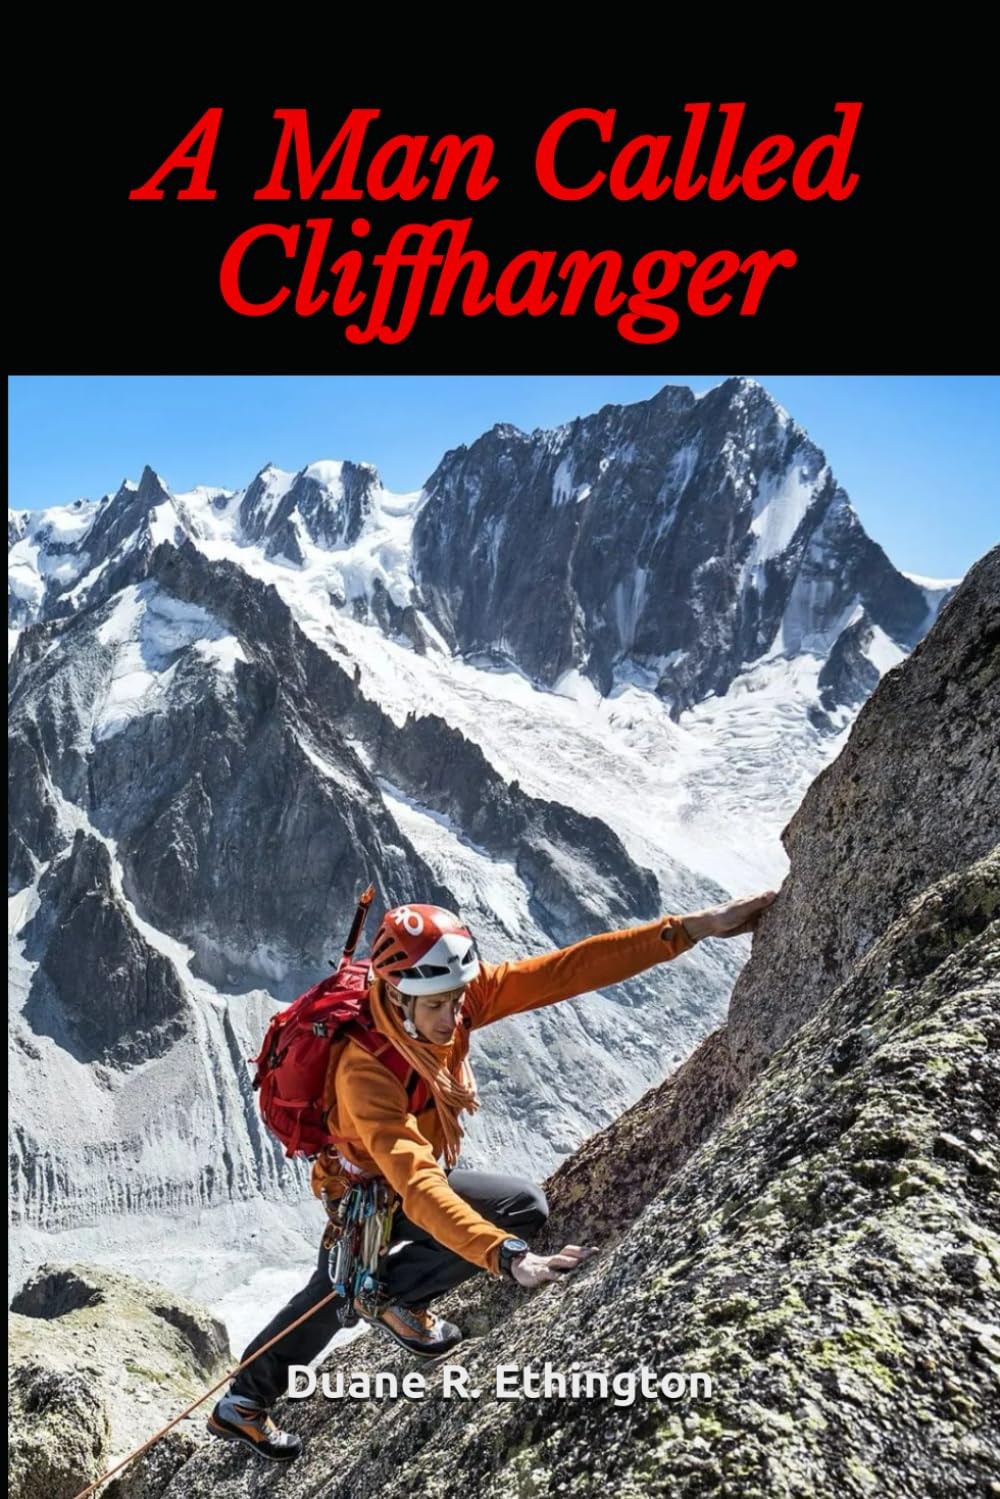 Embark on a Riveting Adventure with Duane R. Ethington's "A Man Called Cliffhanger"